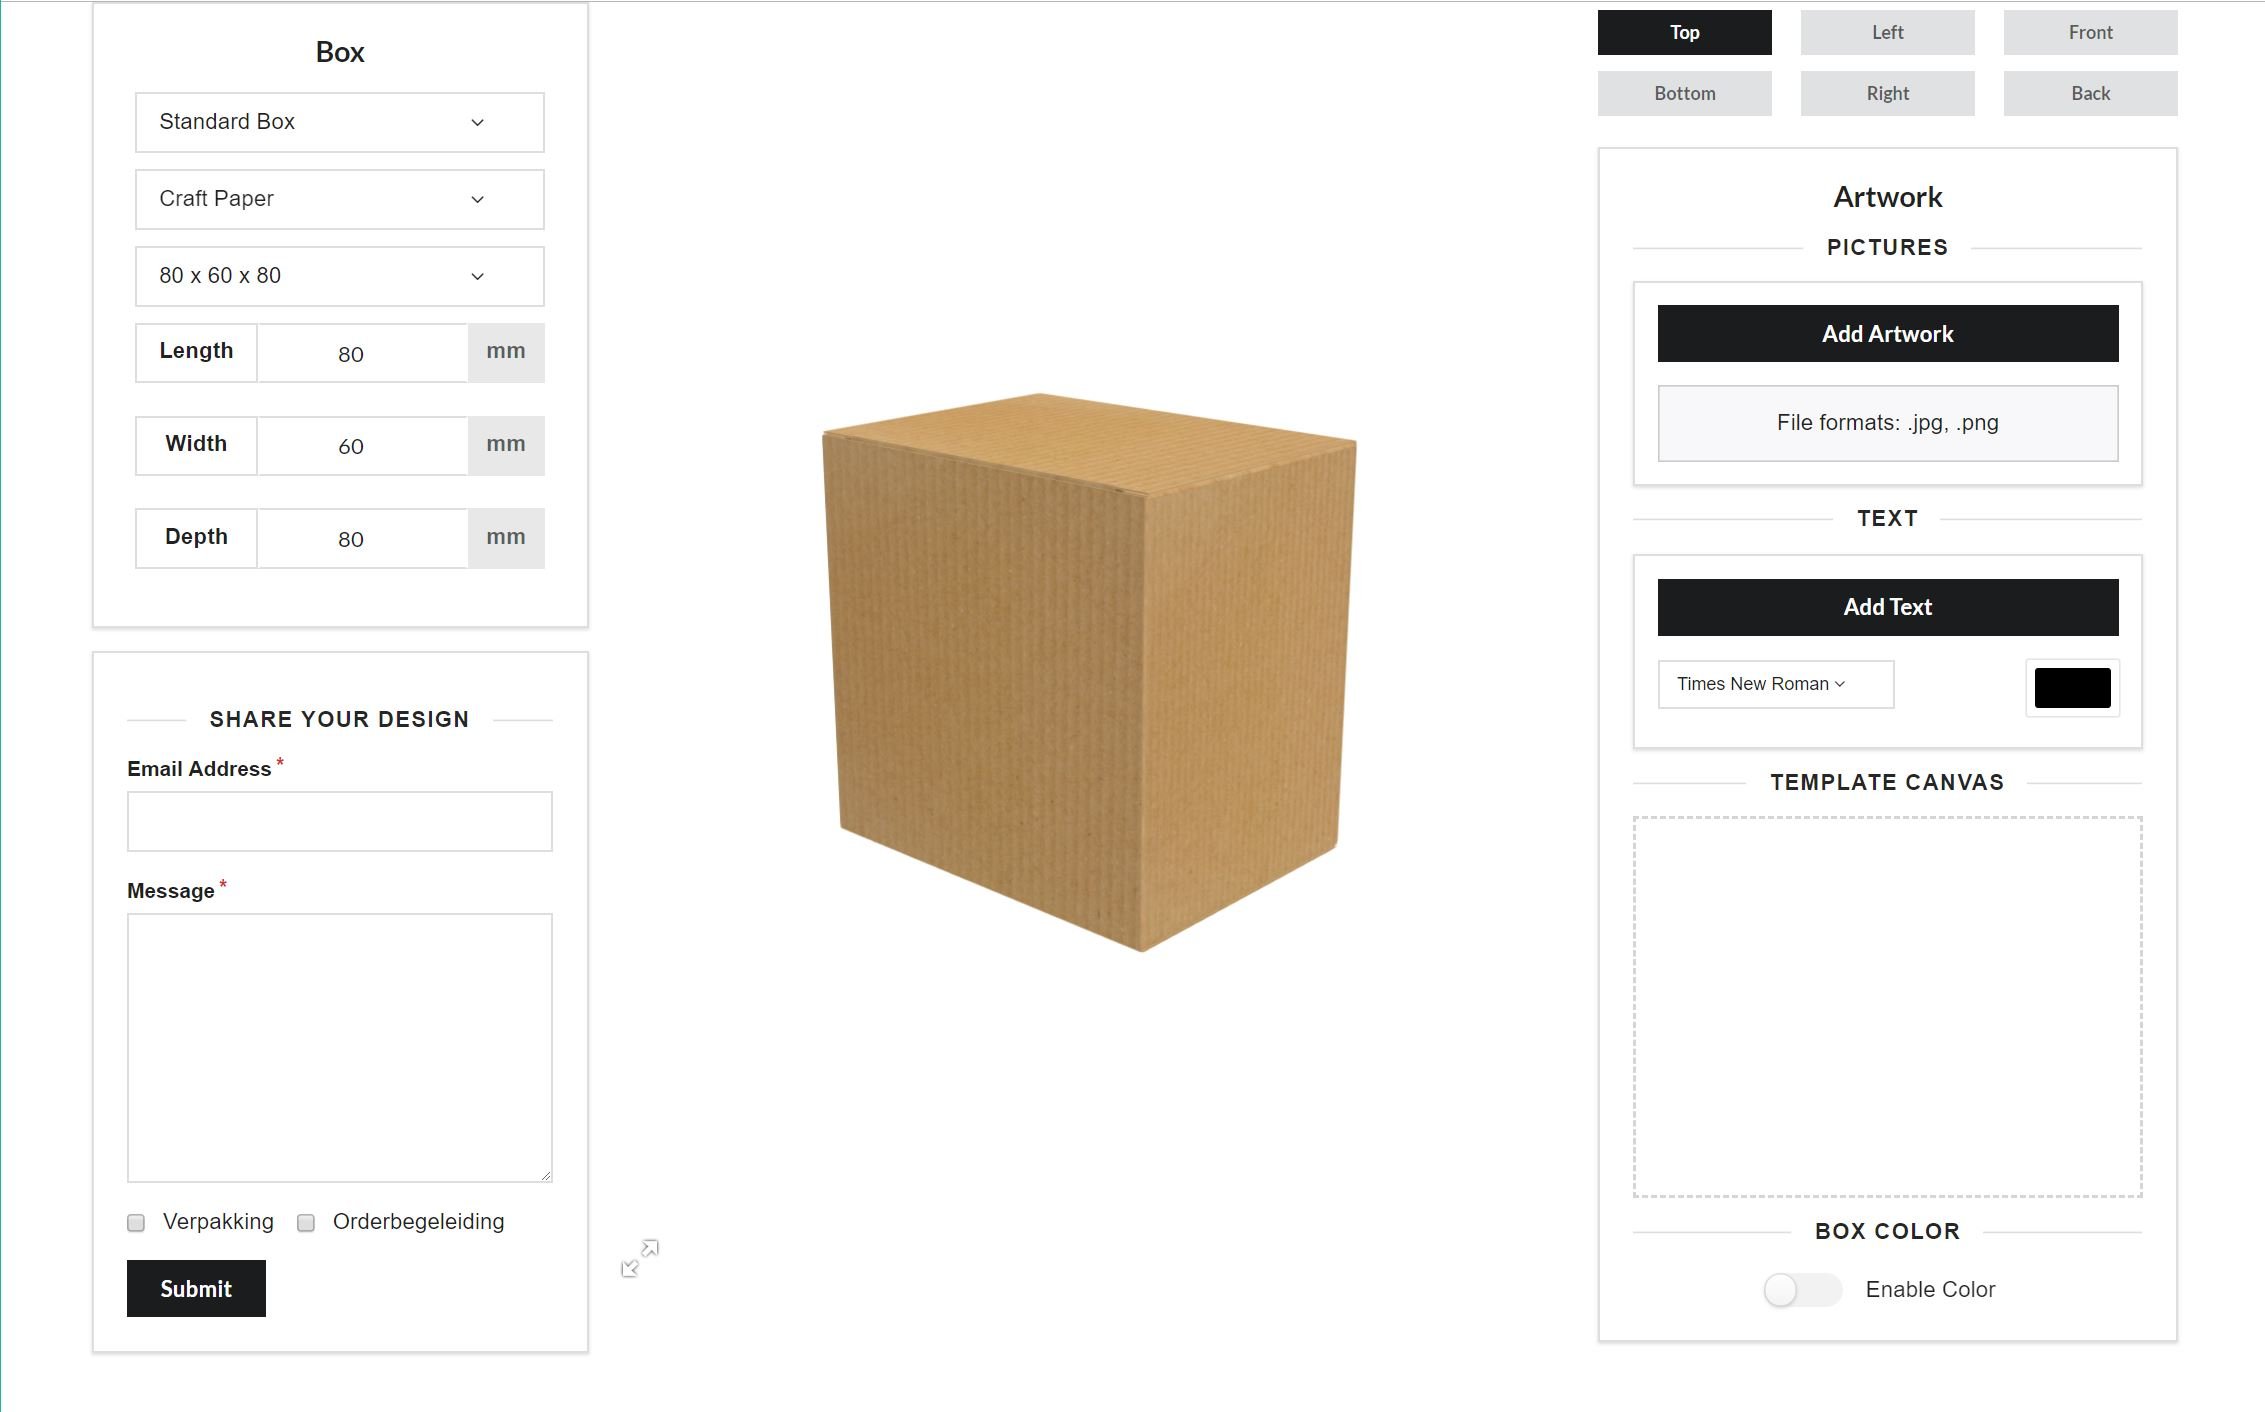 Woman assembling custom boxes created through a product configurator